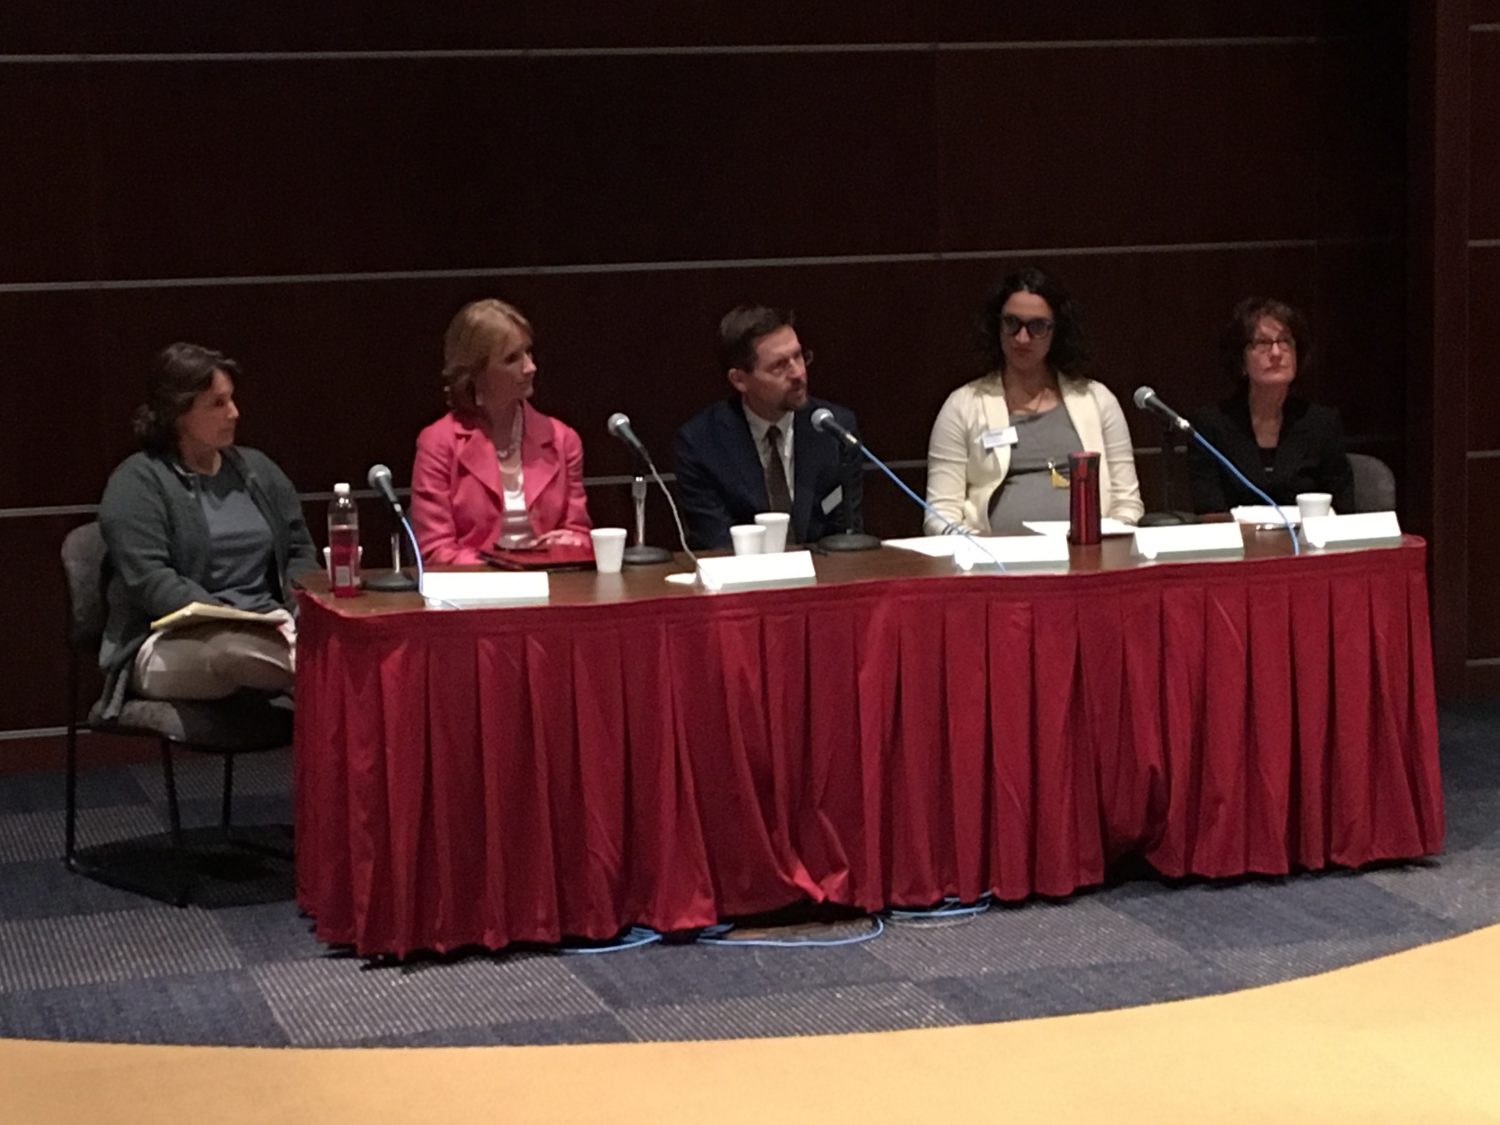 From left: Susan Schueler-Sheveland, Judee Richardson, Dr. Matthew Jansen, Amber Canto, and Patricia Thwaits take part in the UW Colleges and UW-Extension Rural Healthcare Community Roundtable hosted at the Marshfield Clinics Froehlke Auditorium on May 31.